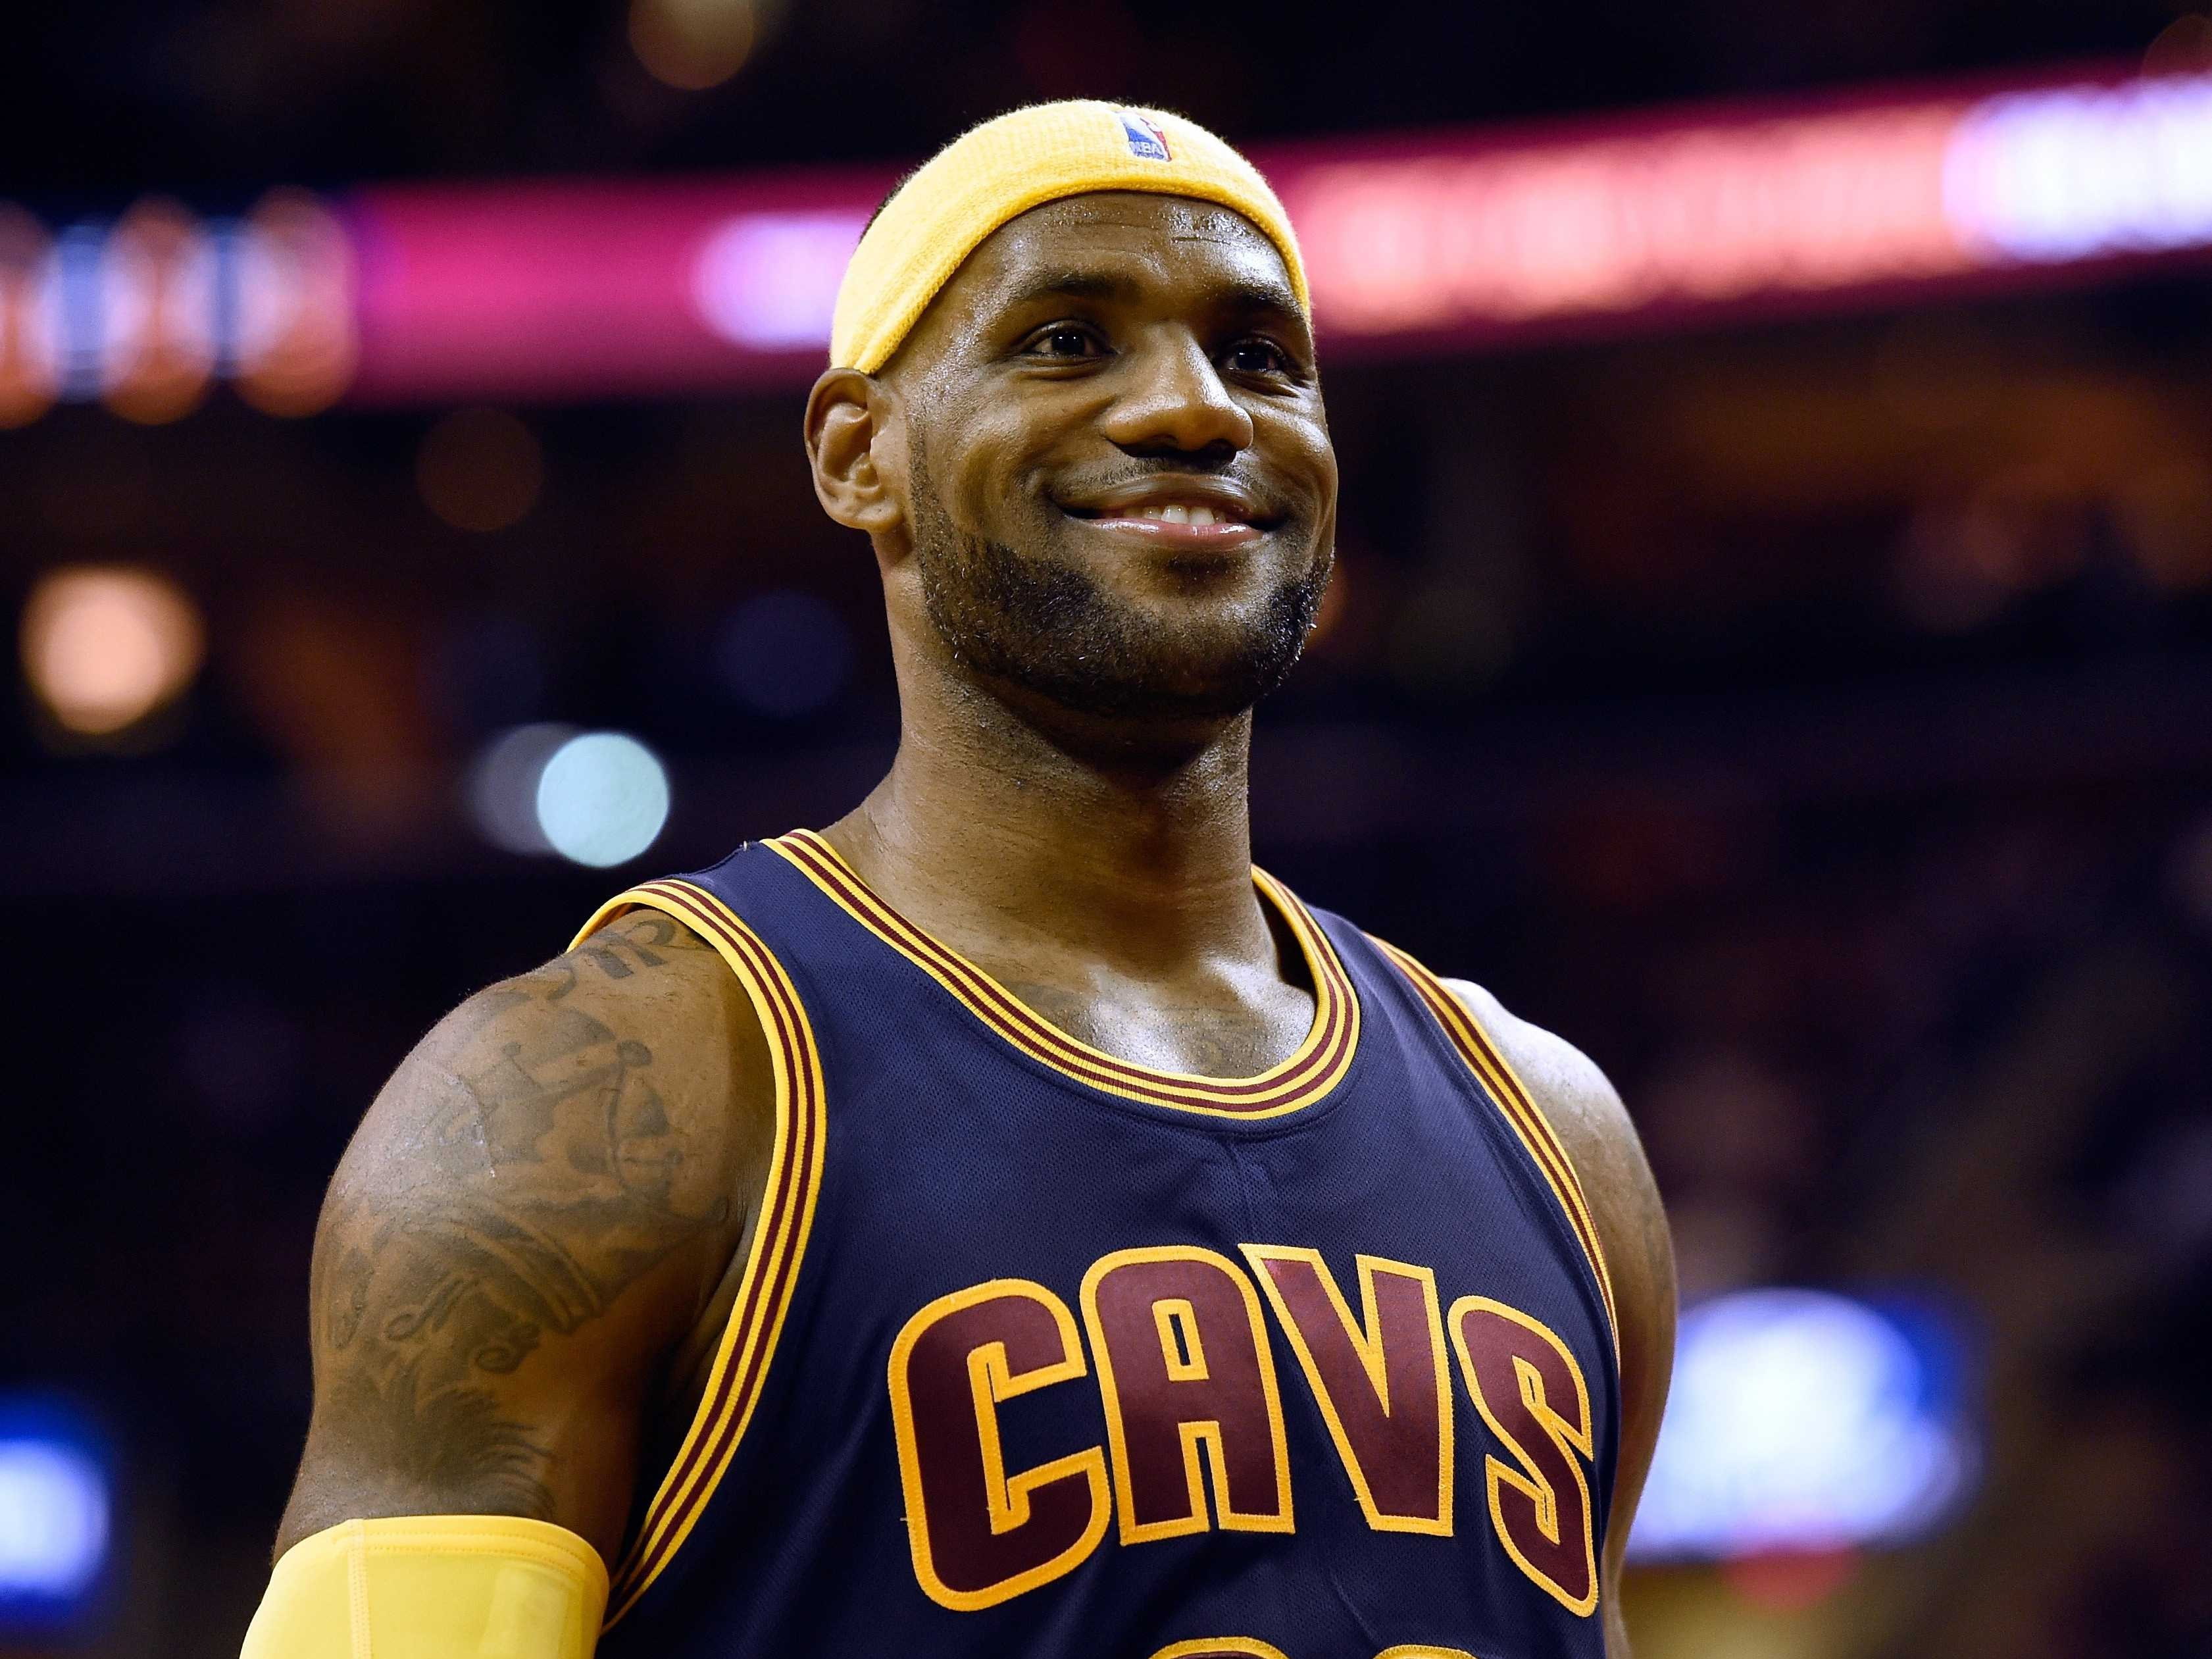 lebron james, sport, young adult, one person, portrait, focus on foreground